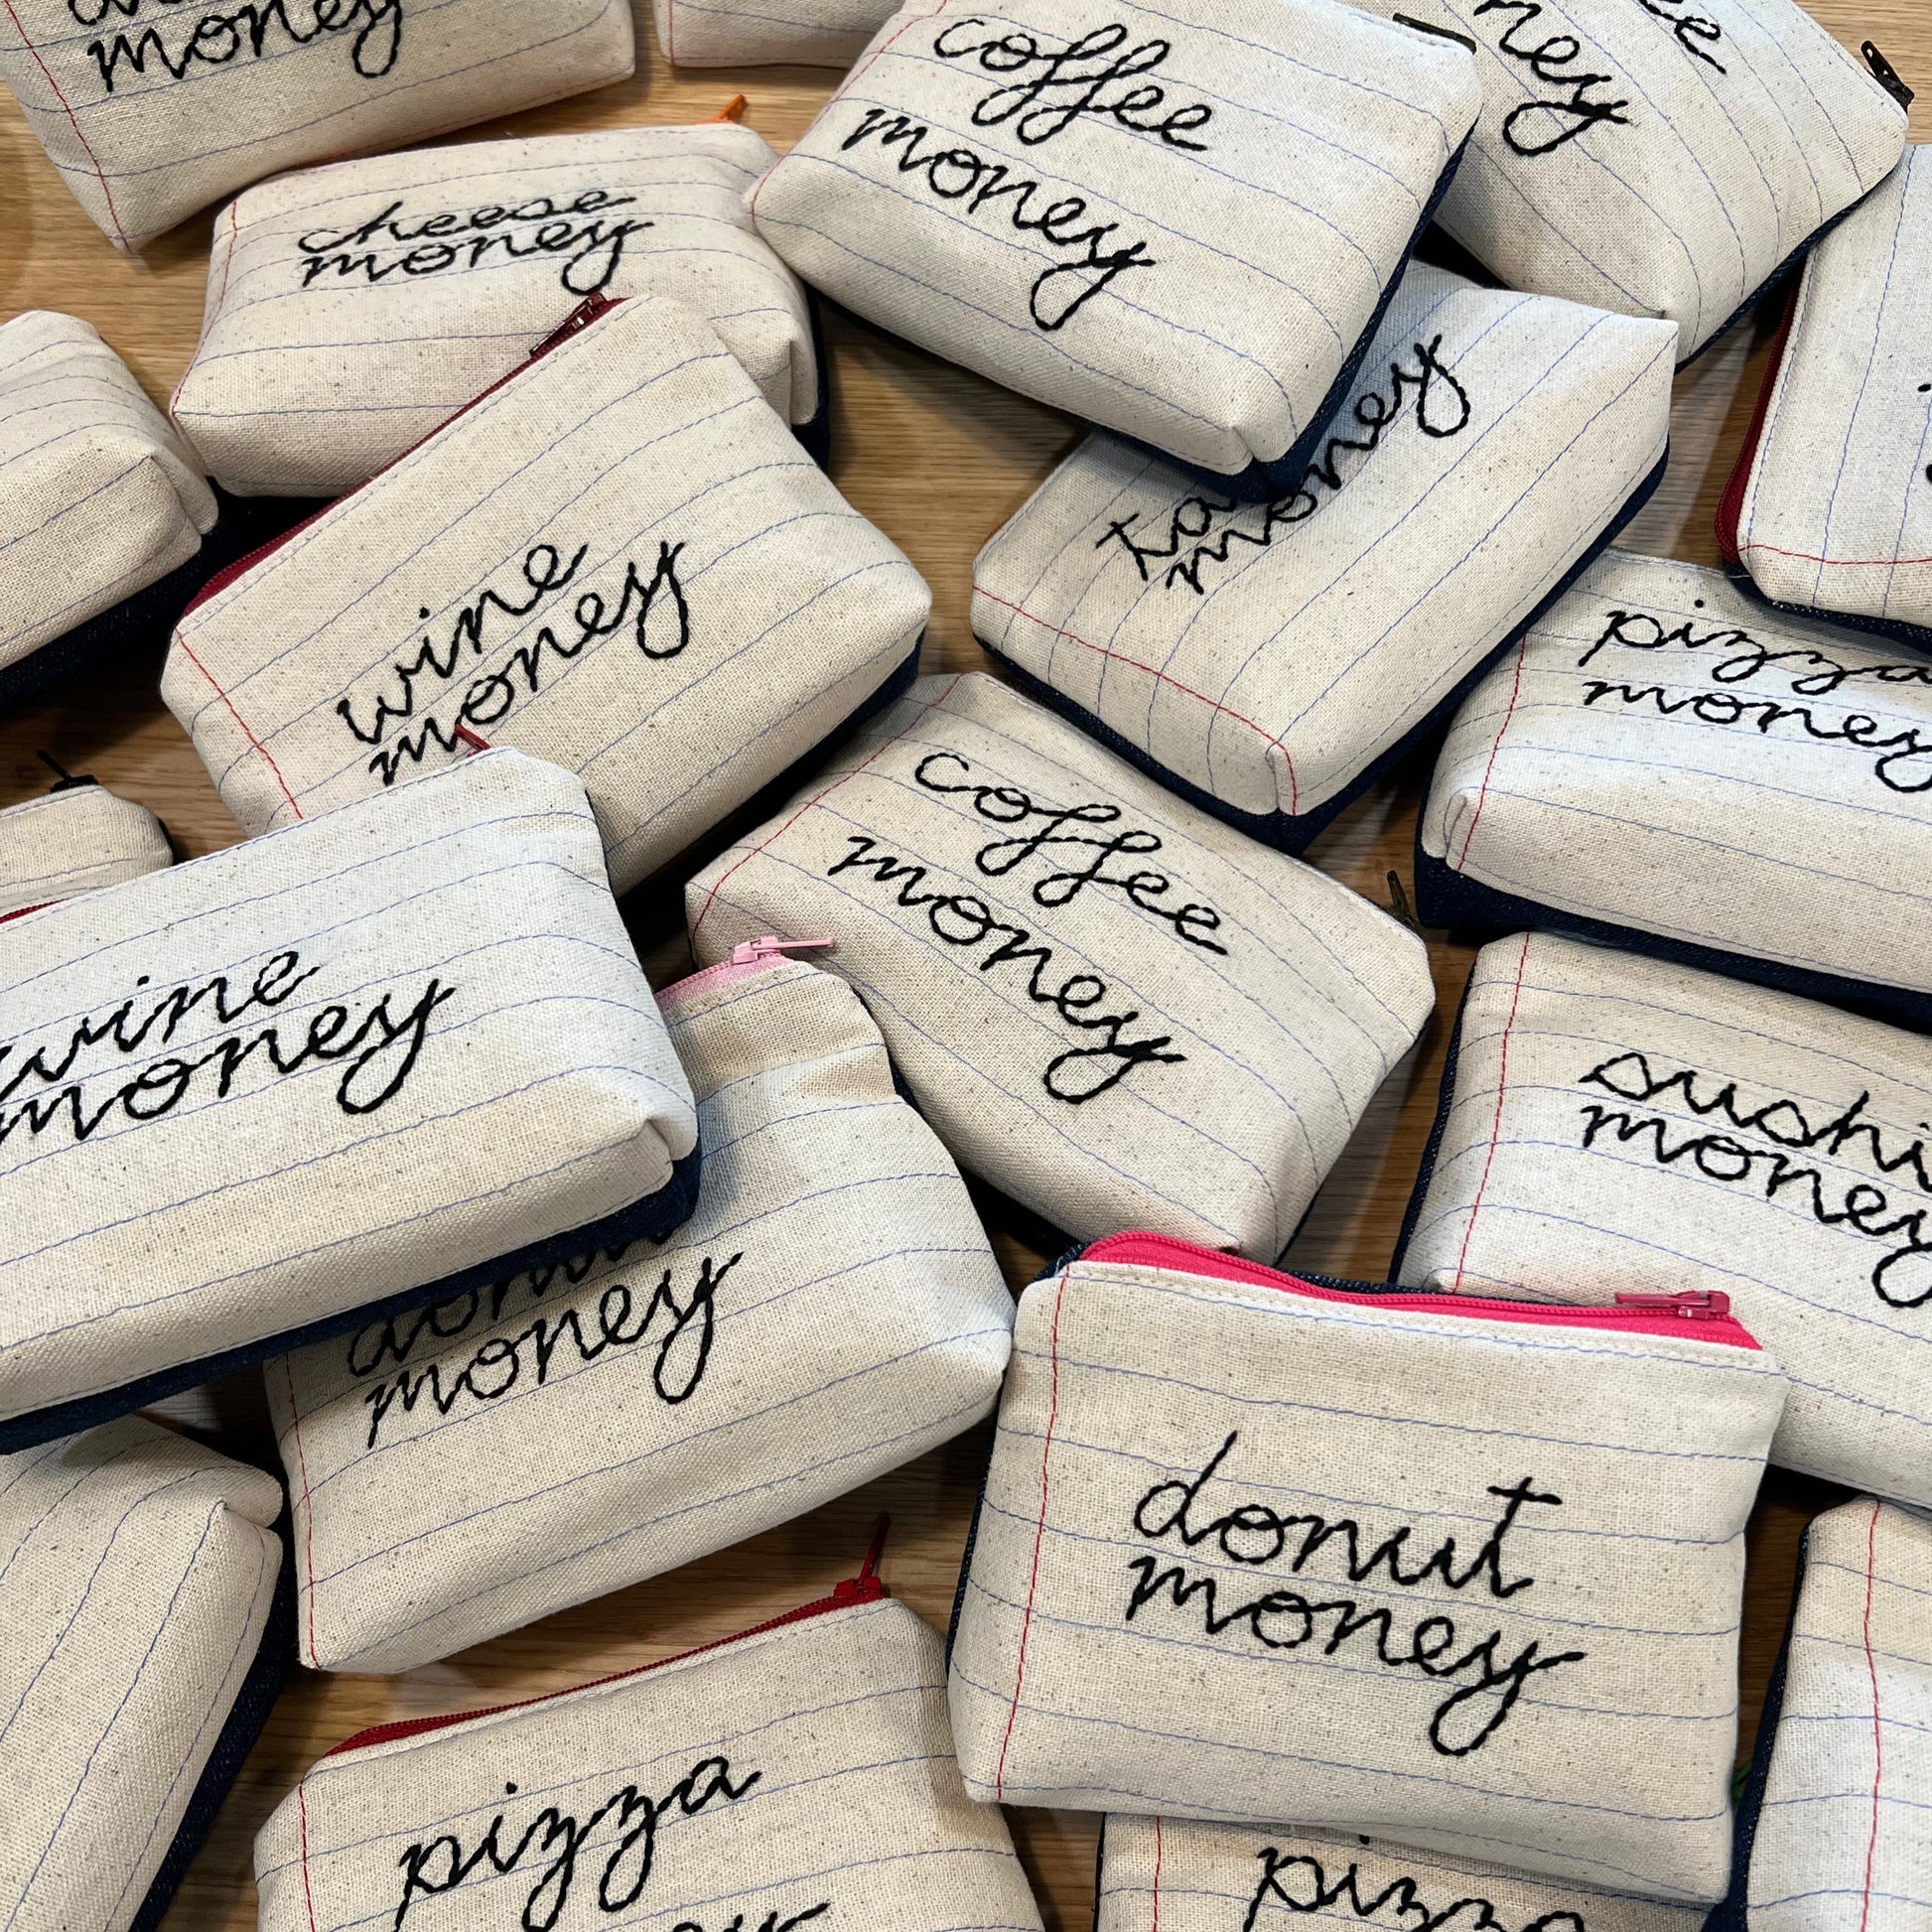 Zipper pouches -- hand sewn design made to look like lined paper. Each one says something different -- donut money, cheese money, wine money, coffee money, sushi money, boba money, pizza money 